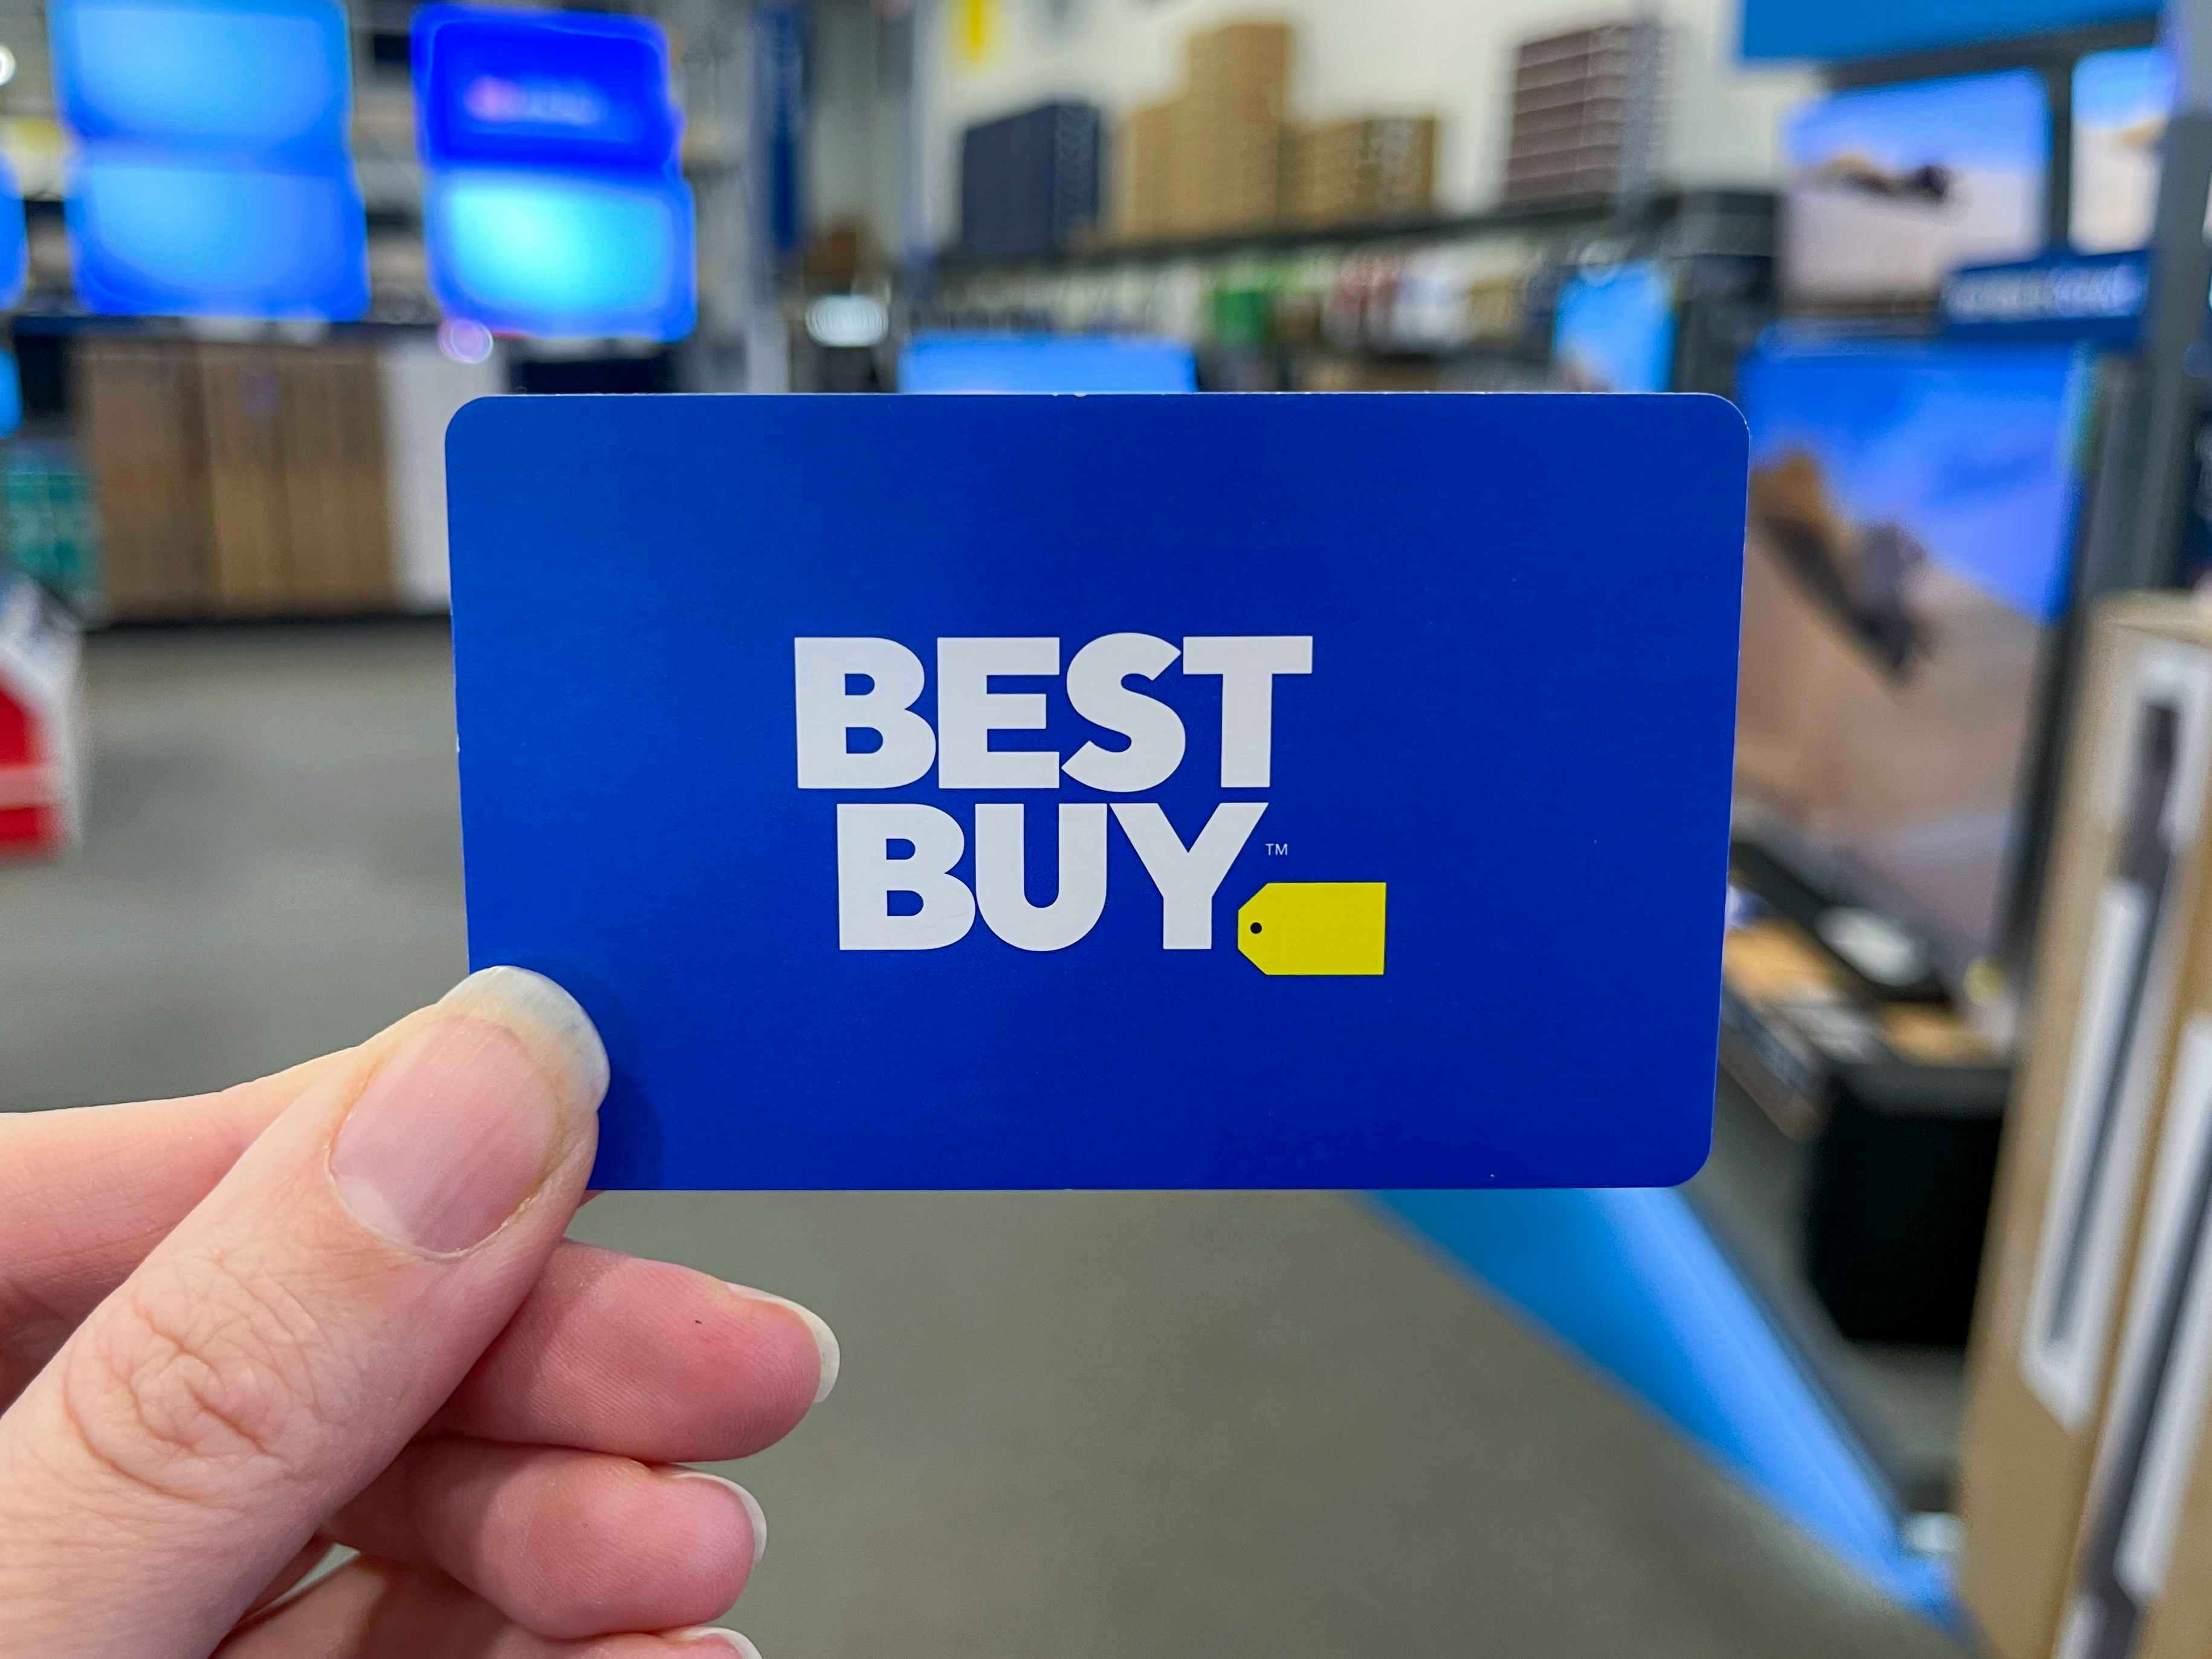 A person's hand holding a Best Buy gift card inside Best Buy.